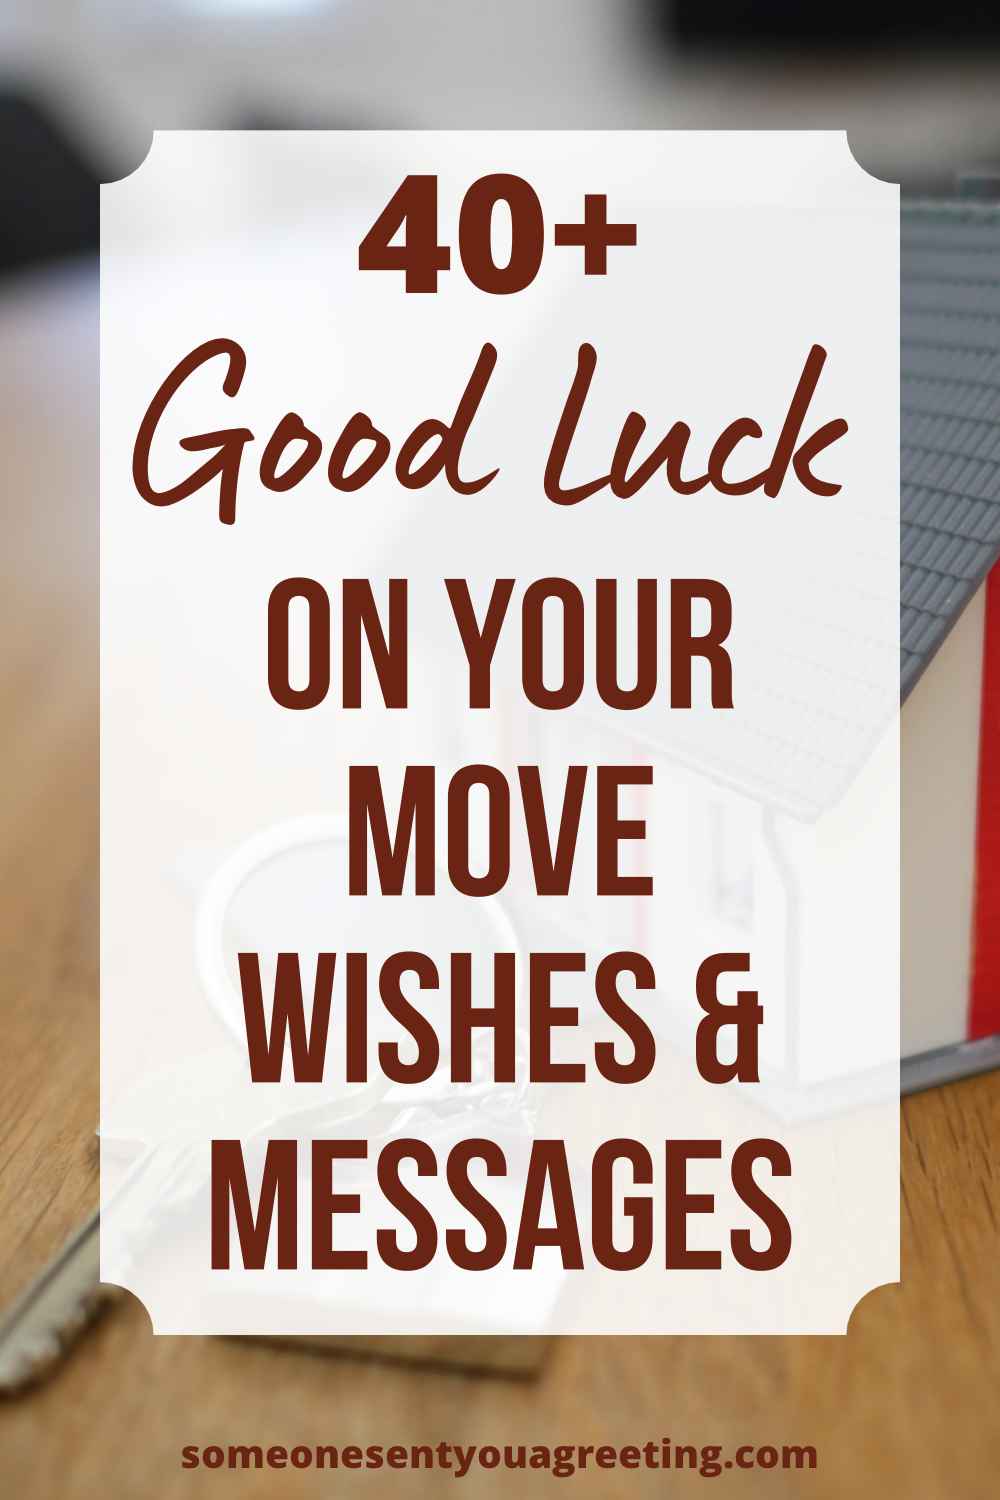 40+ Good Luck on your Move Wishes & Messages